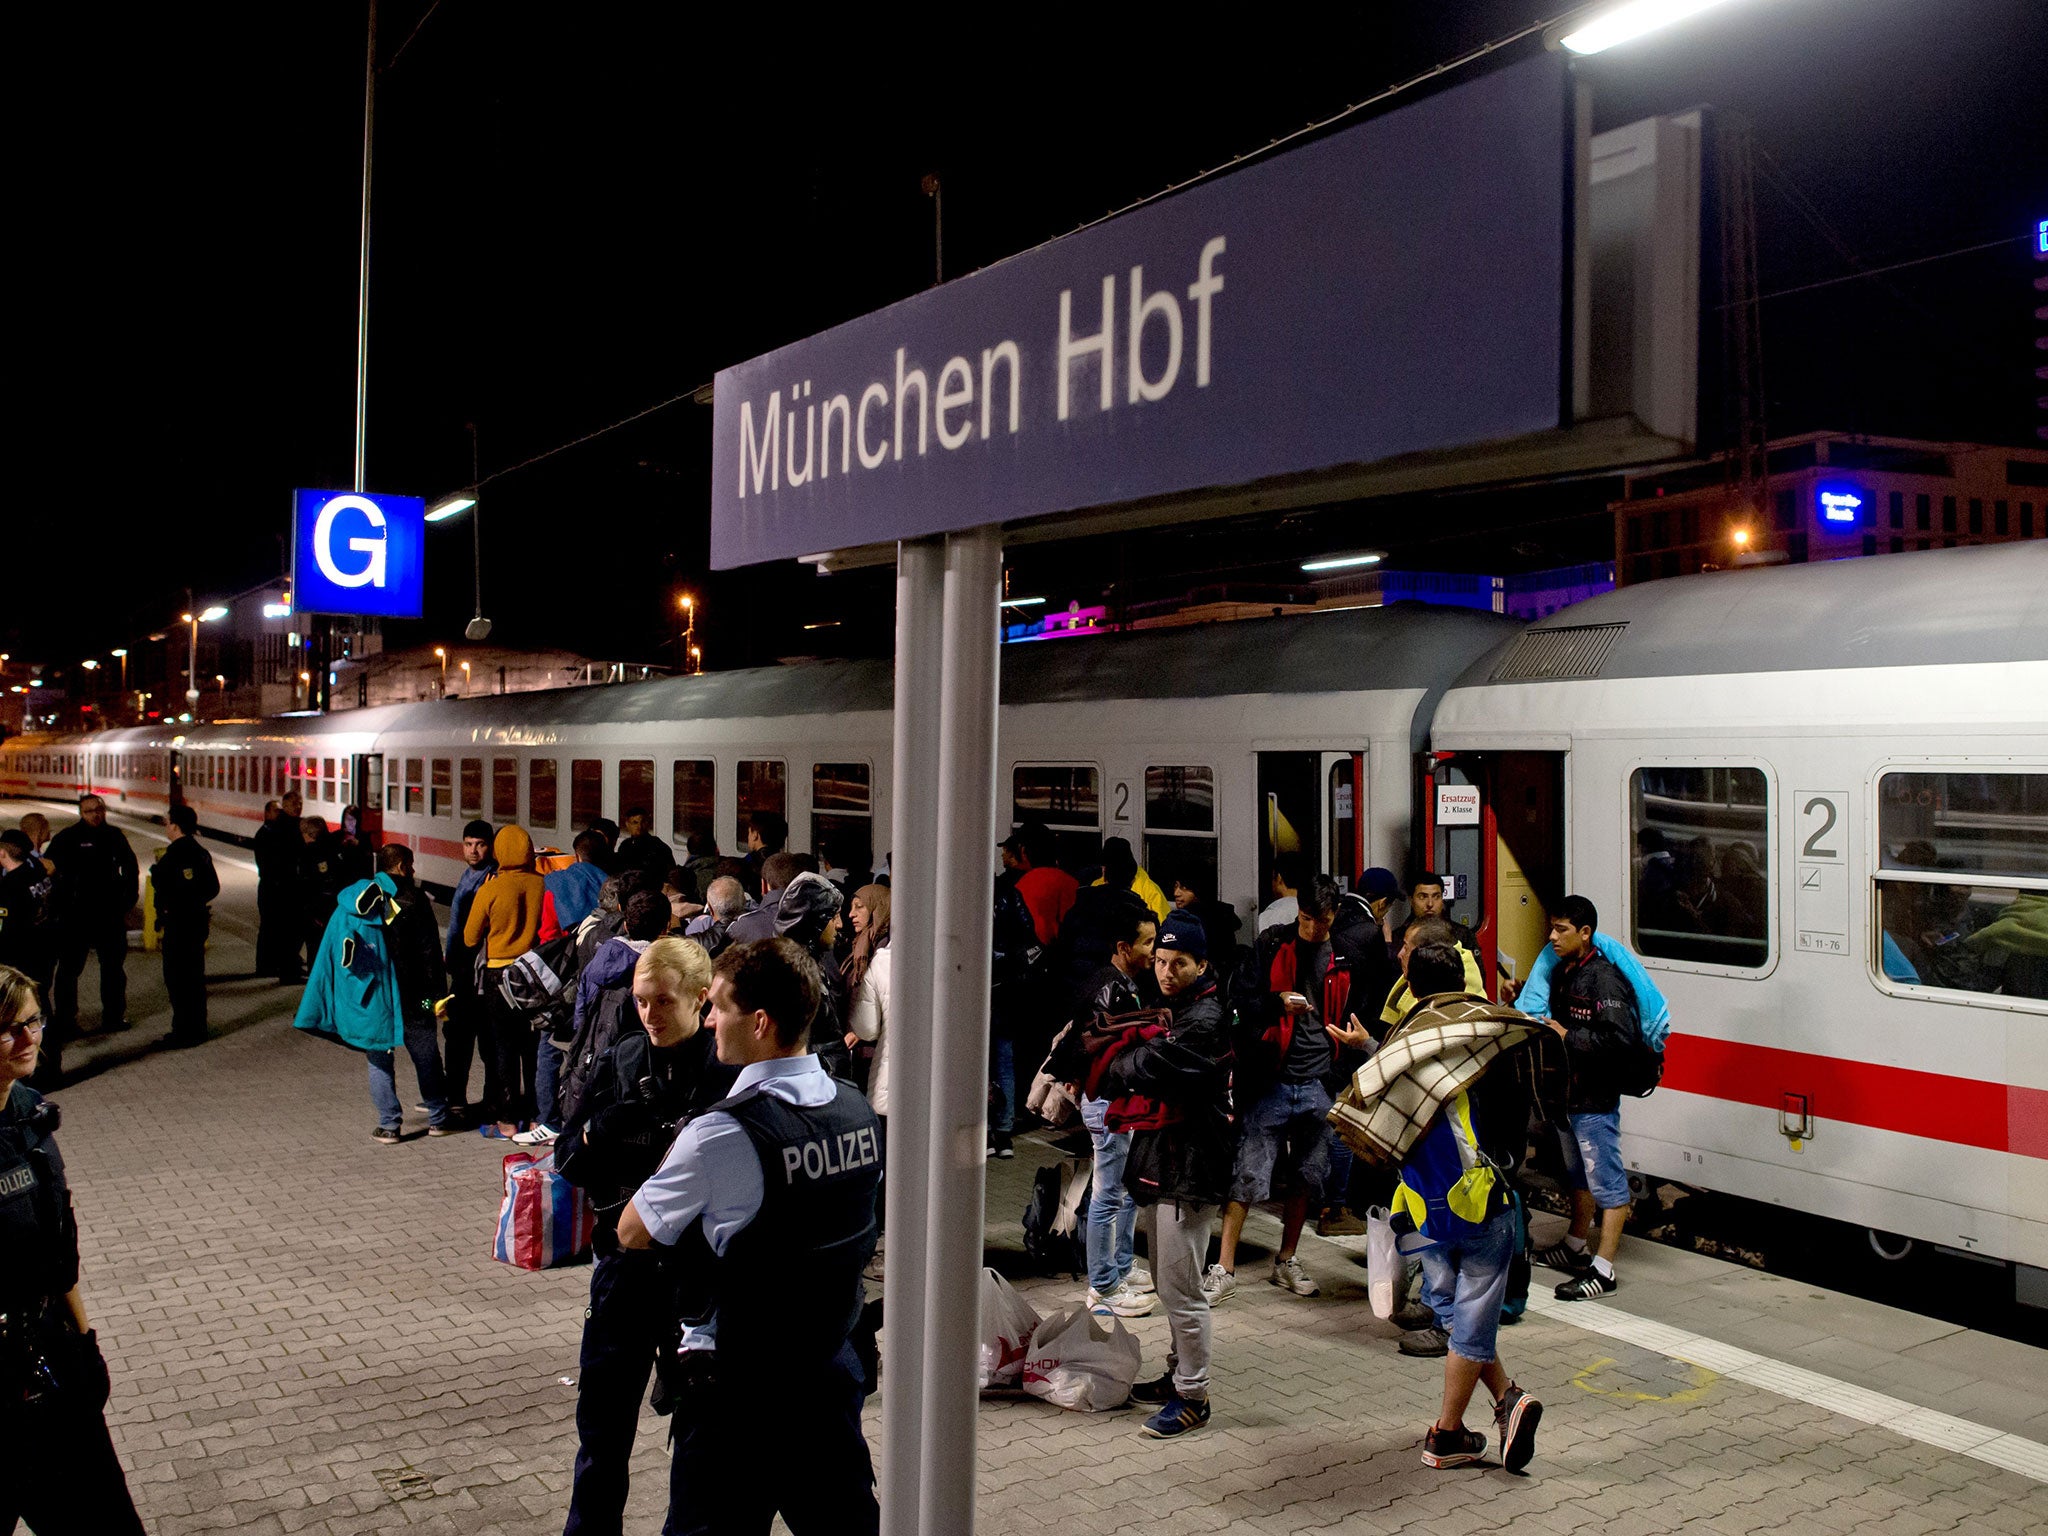 Munich Central Station has been evacuated